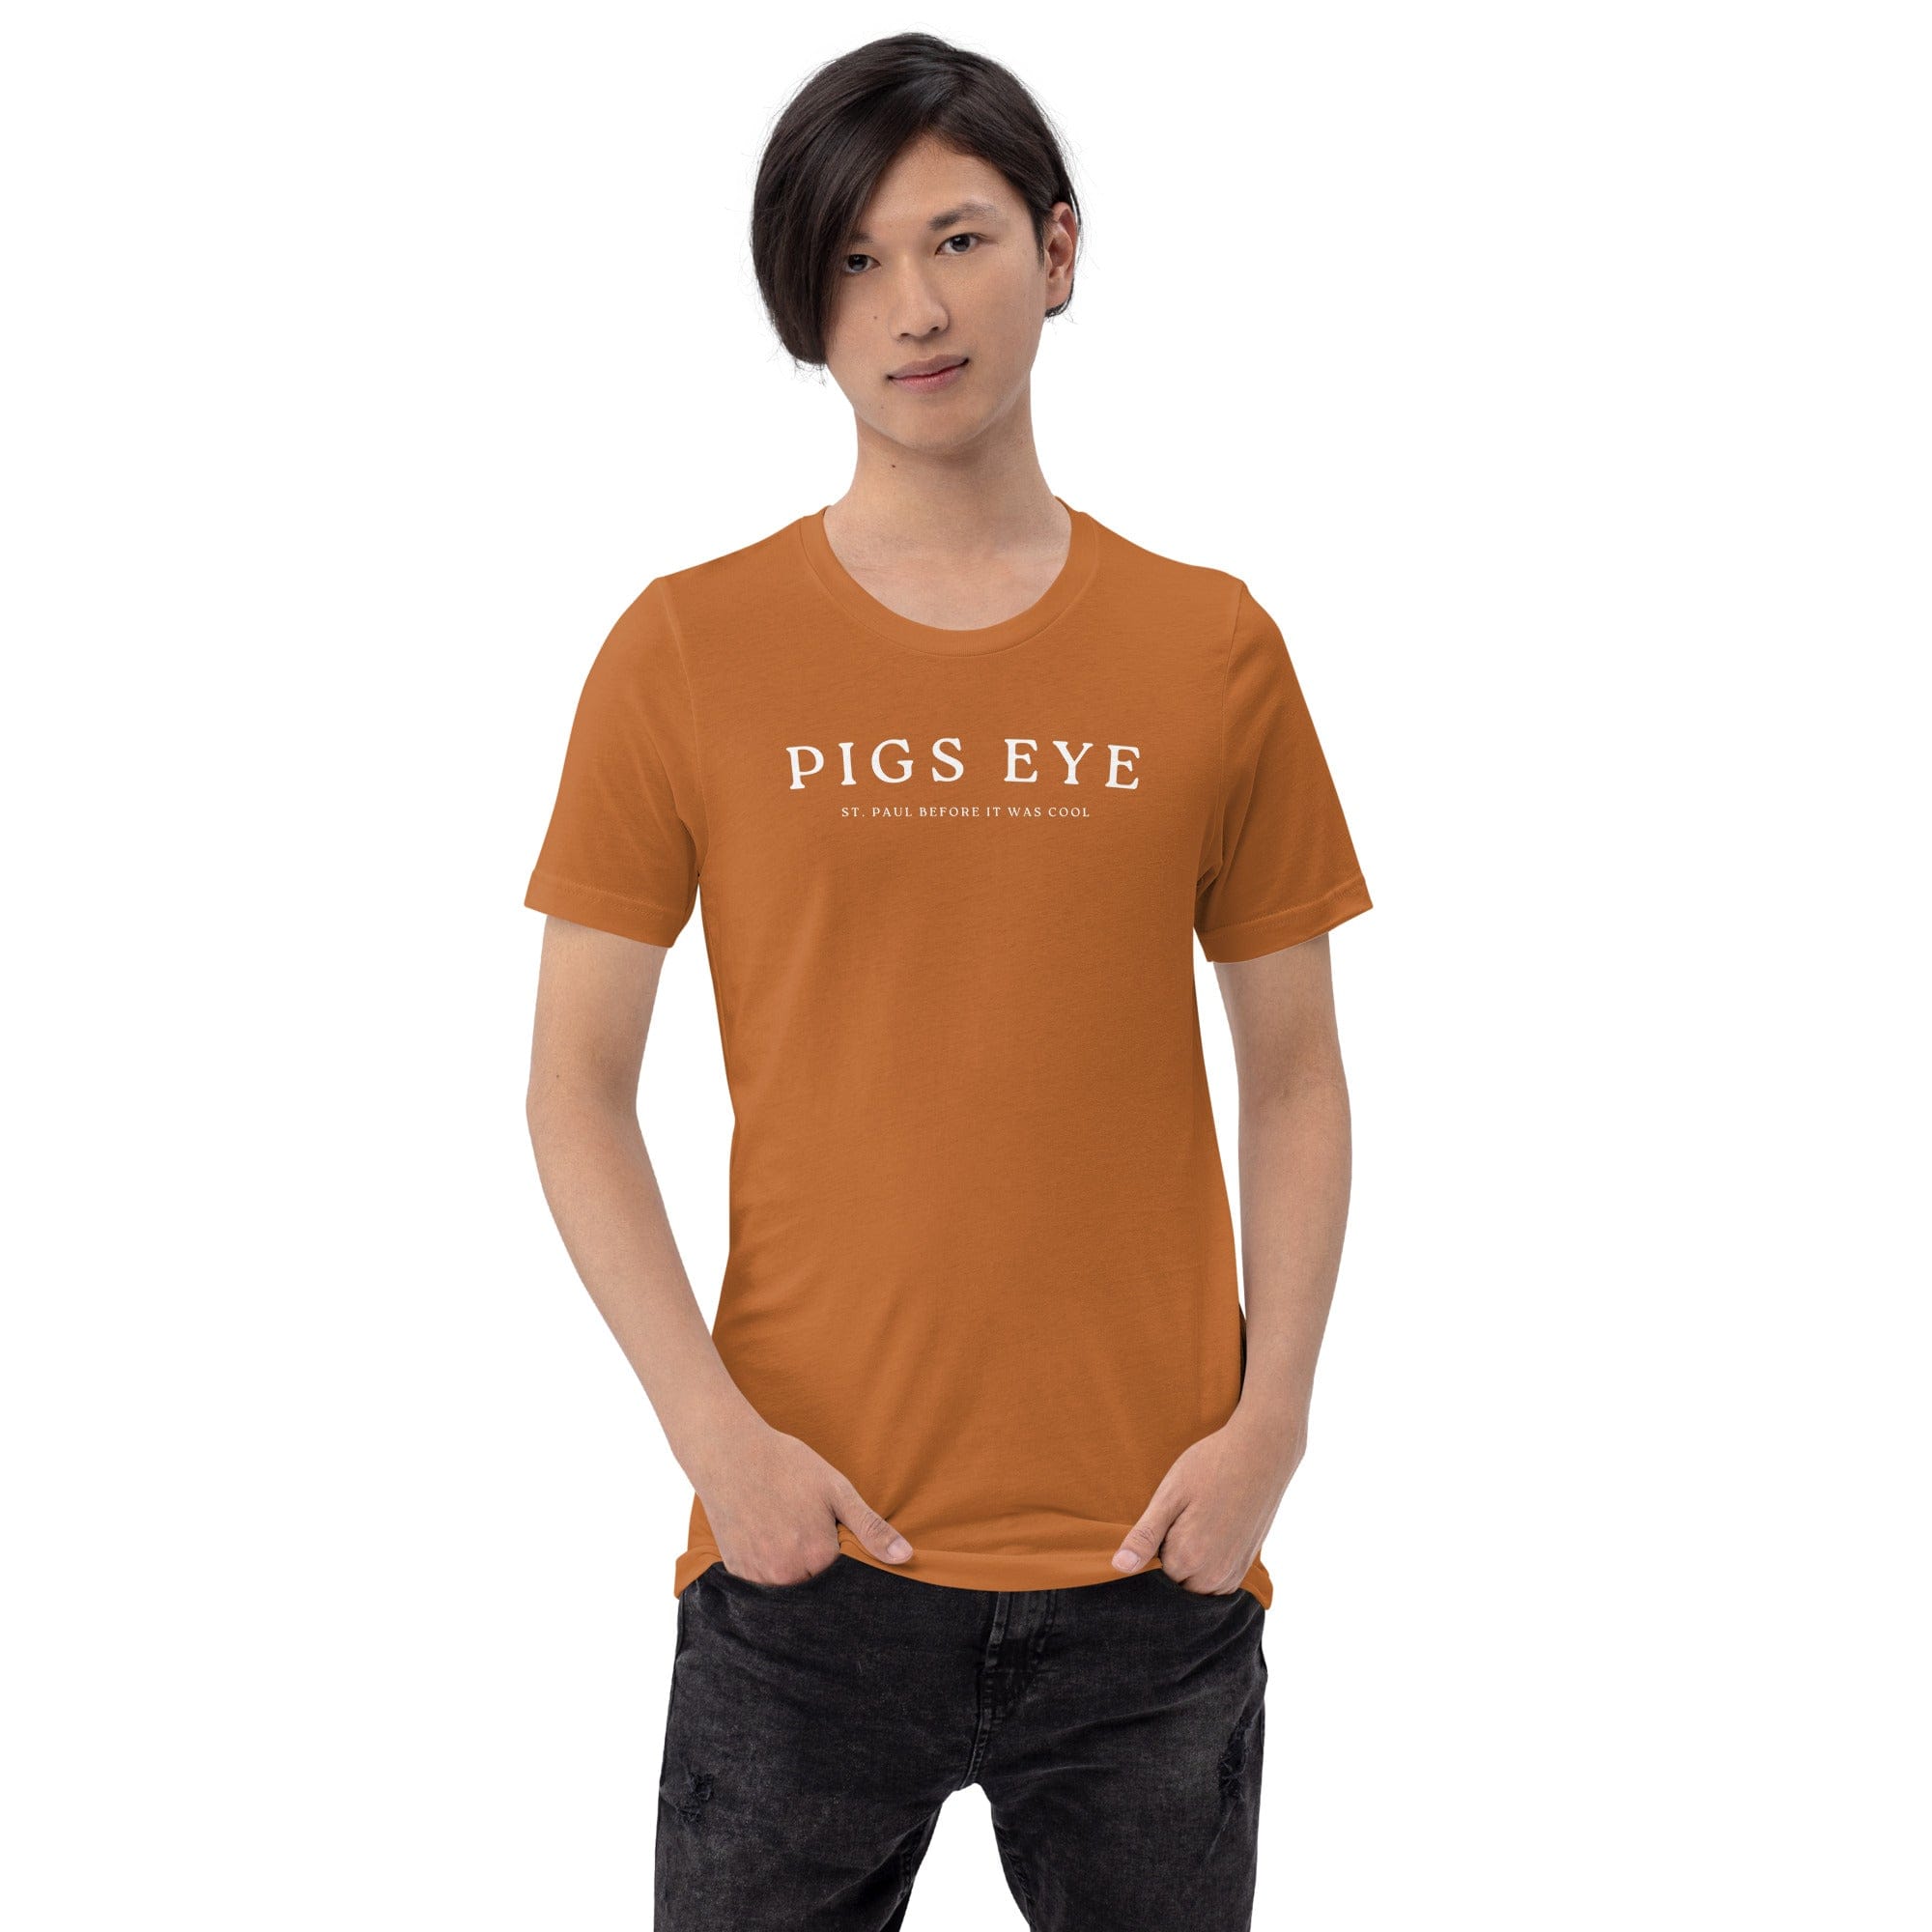 Pigs Eye - St. Paul Before it Was Cool Men's/Unisex T-Shirt ThatMNLife Minnesota Custom T-Shirts and Gifts